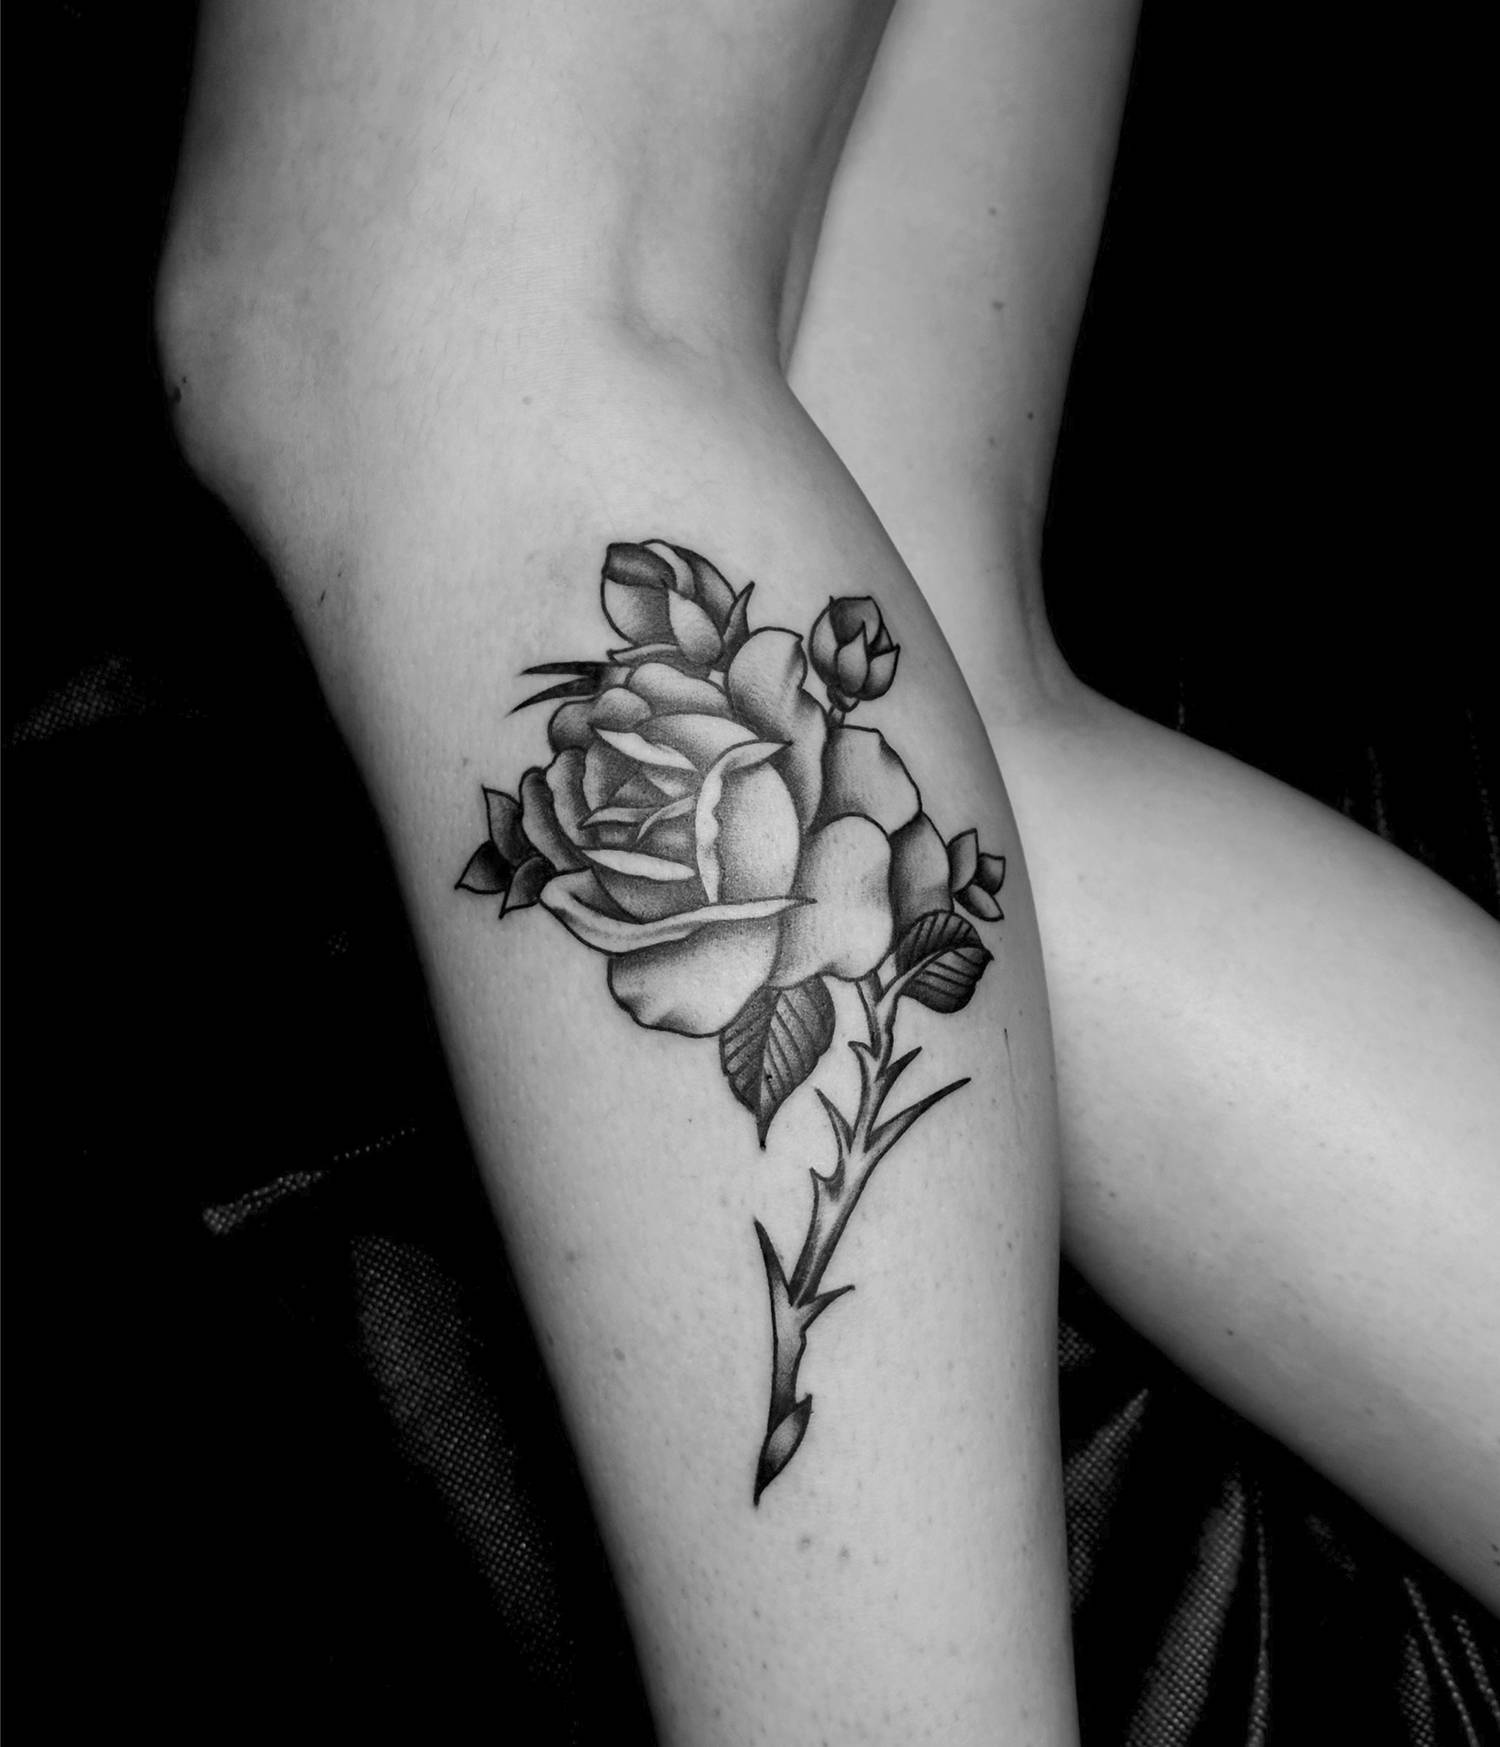 Mark Clifford, an Eternal Ink Pro Team Artist, created this rose with black ink and a gray wash